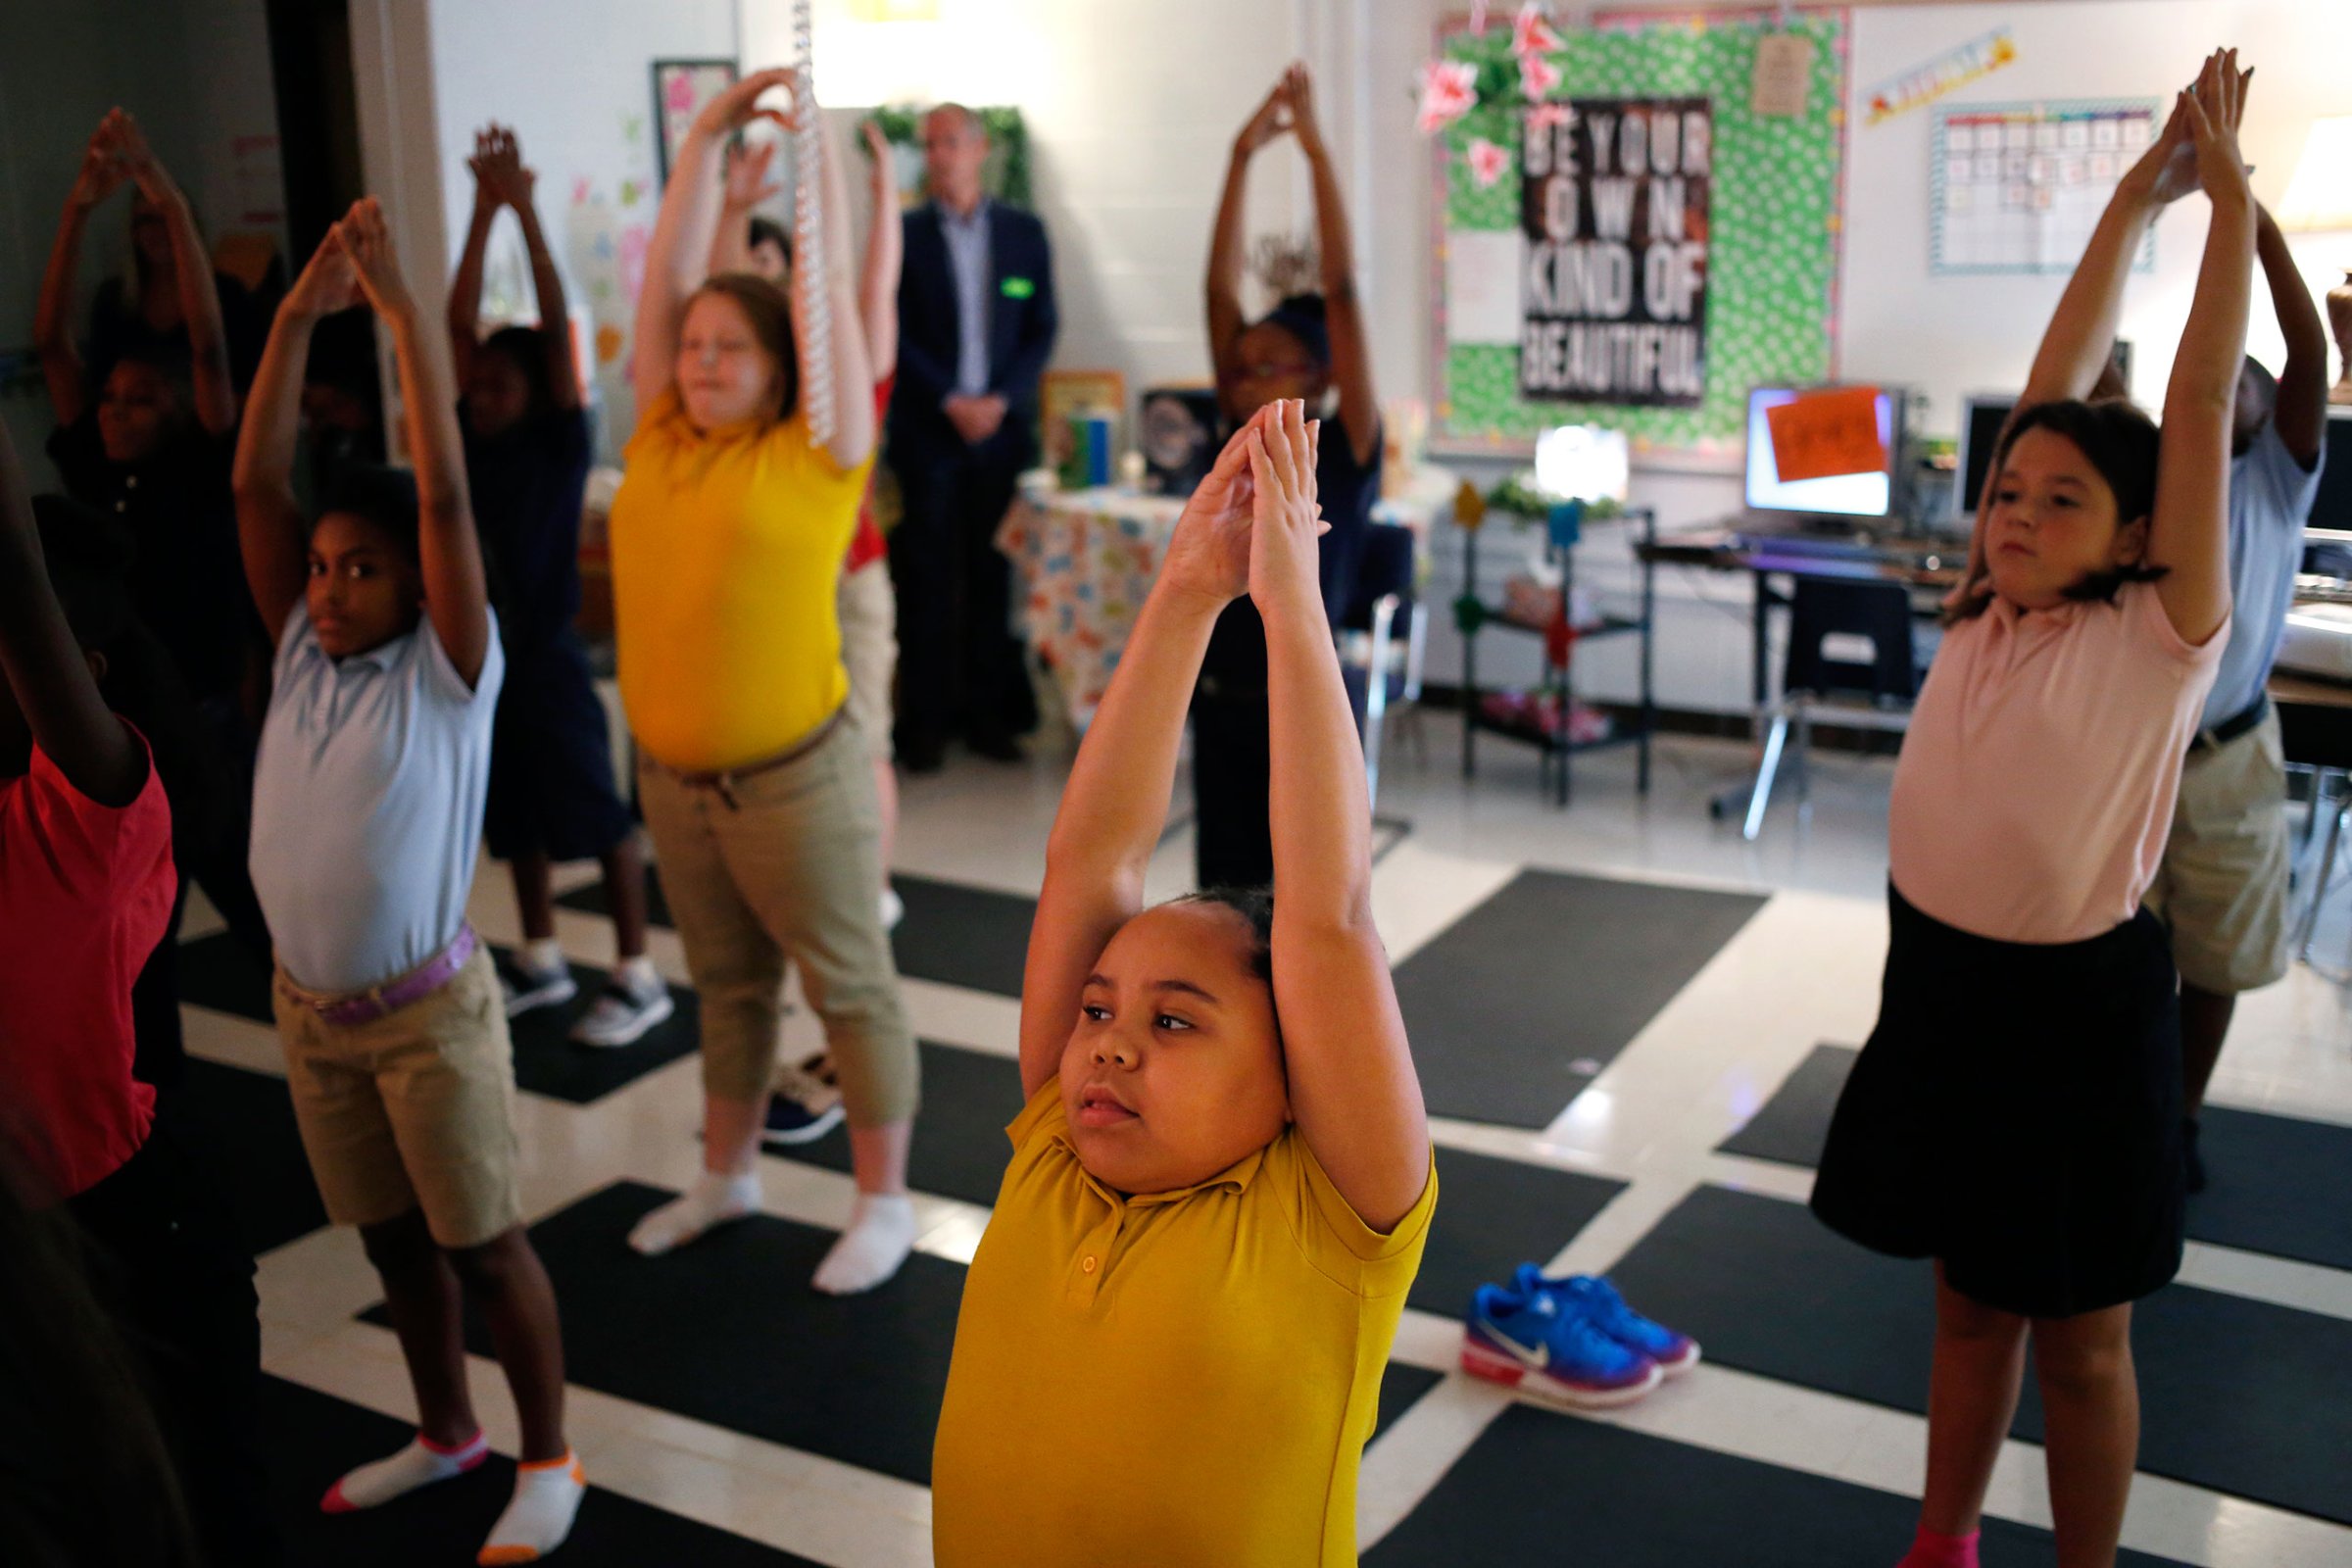 Fifth-graders flow through yoga-inspired poses in a mindfulness class at a public school in Louisville, Ky.